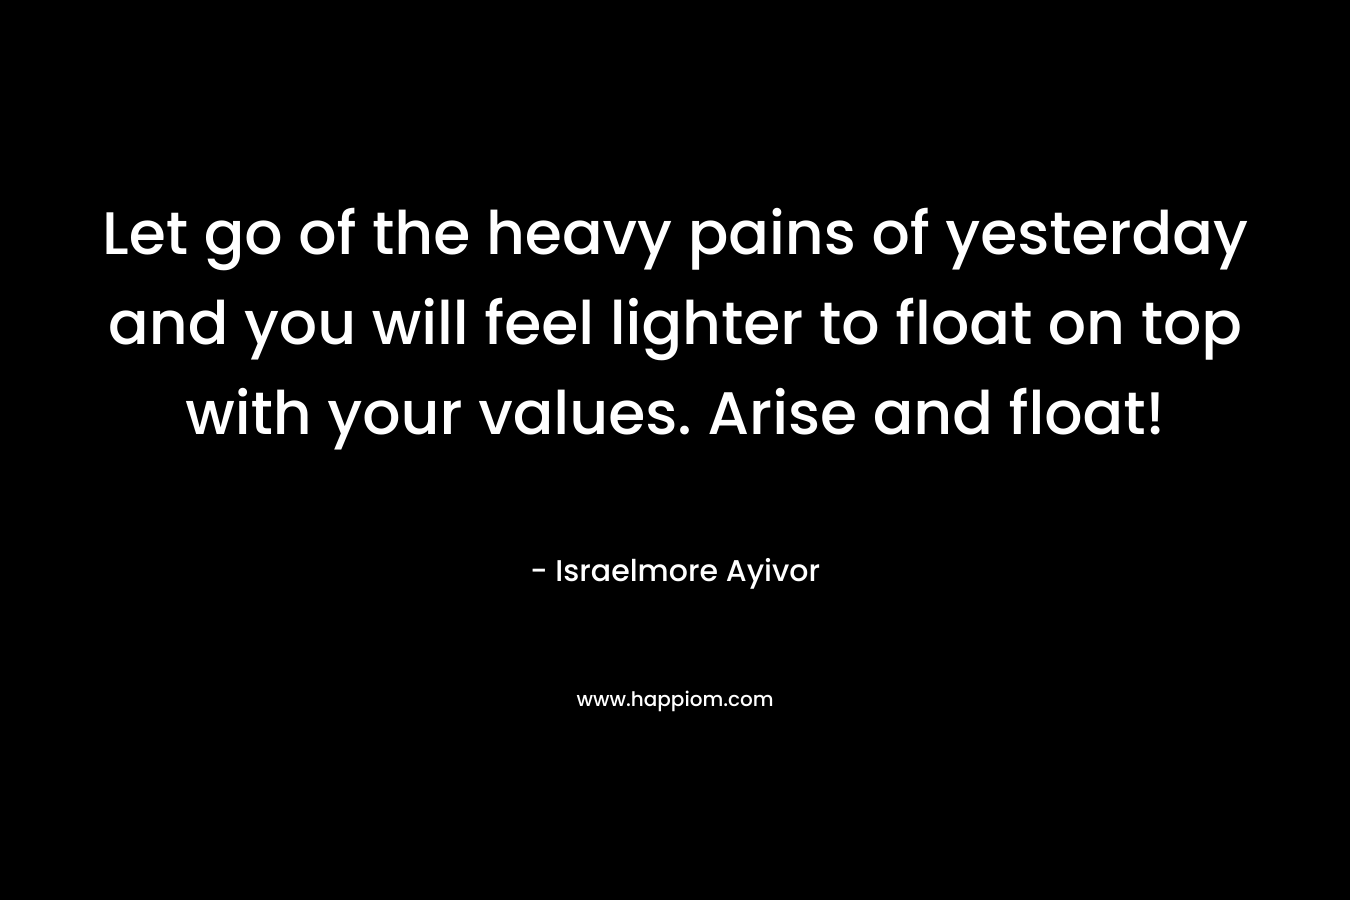 Let go of the heavy pains of yesterday and you will feel lighter to float on top with your values. Arise and float! – Israelmore Ayivor